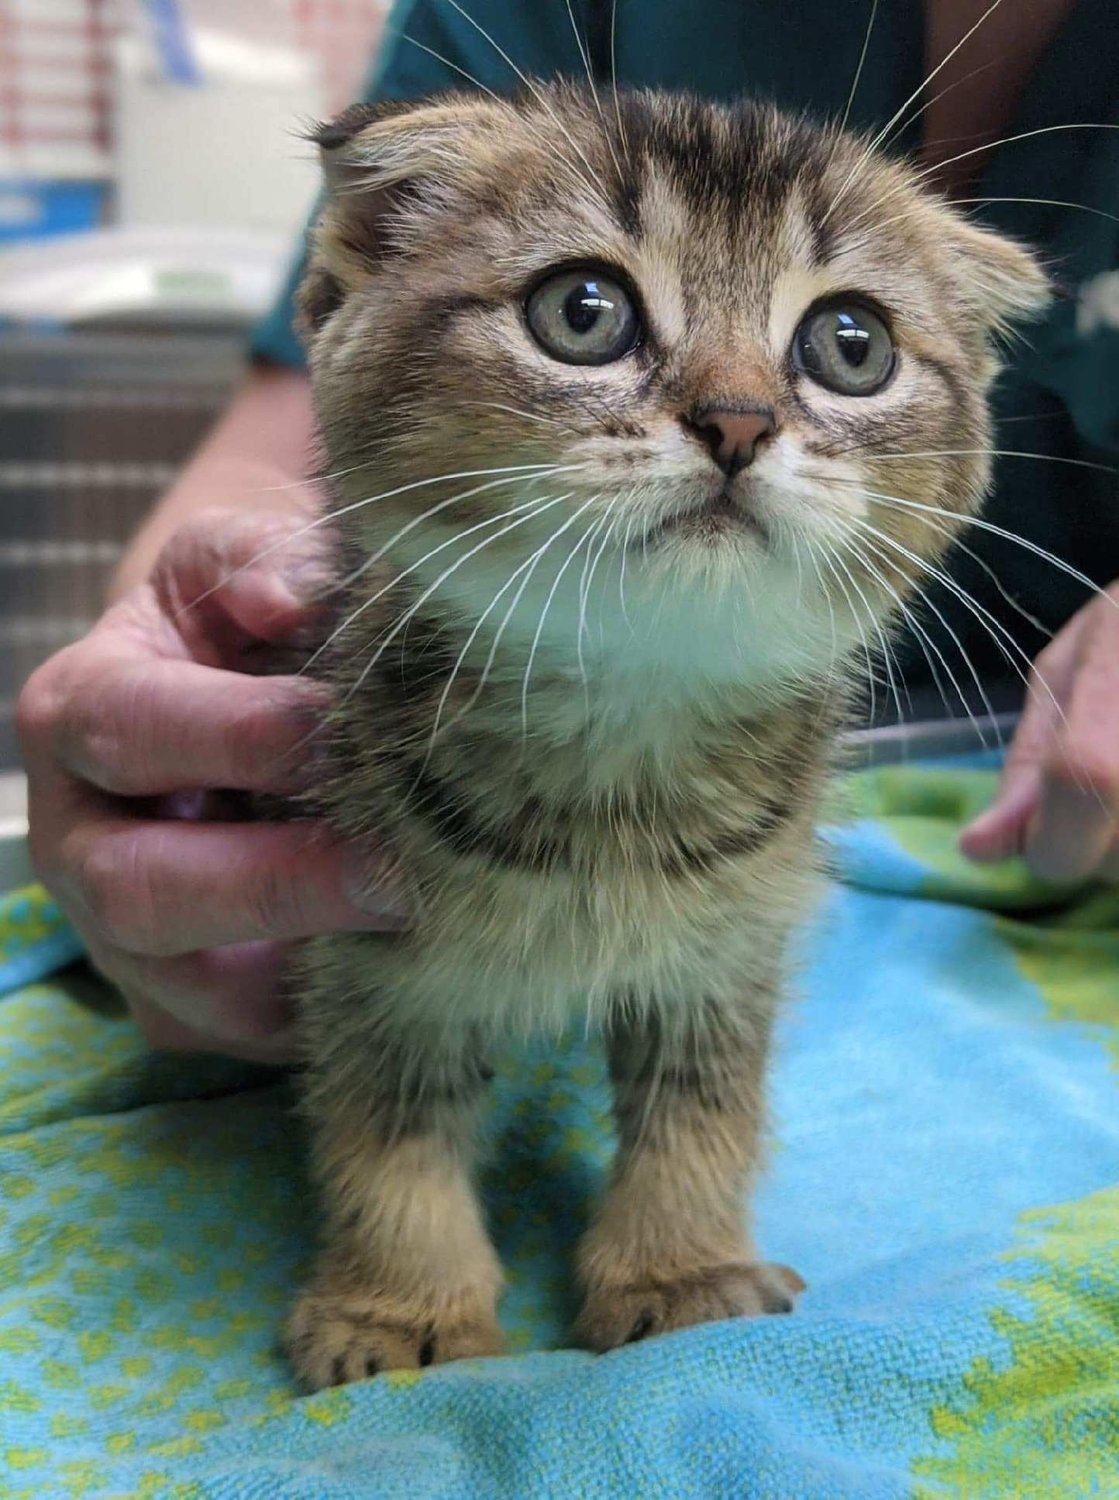 Owners of kittens like this one will have to look farther afield to get medical care following Glen Animal Hospital’s closing.